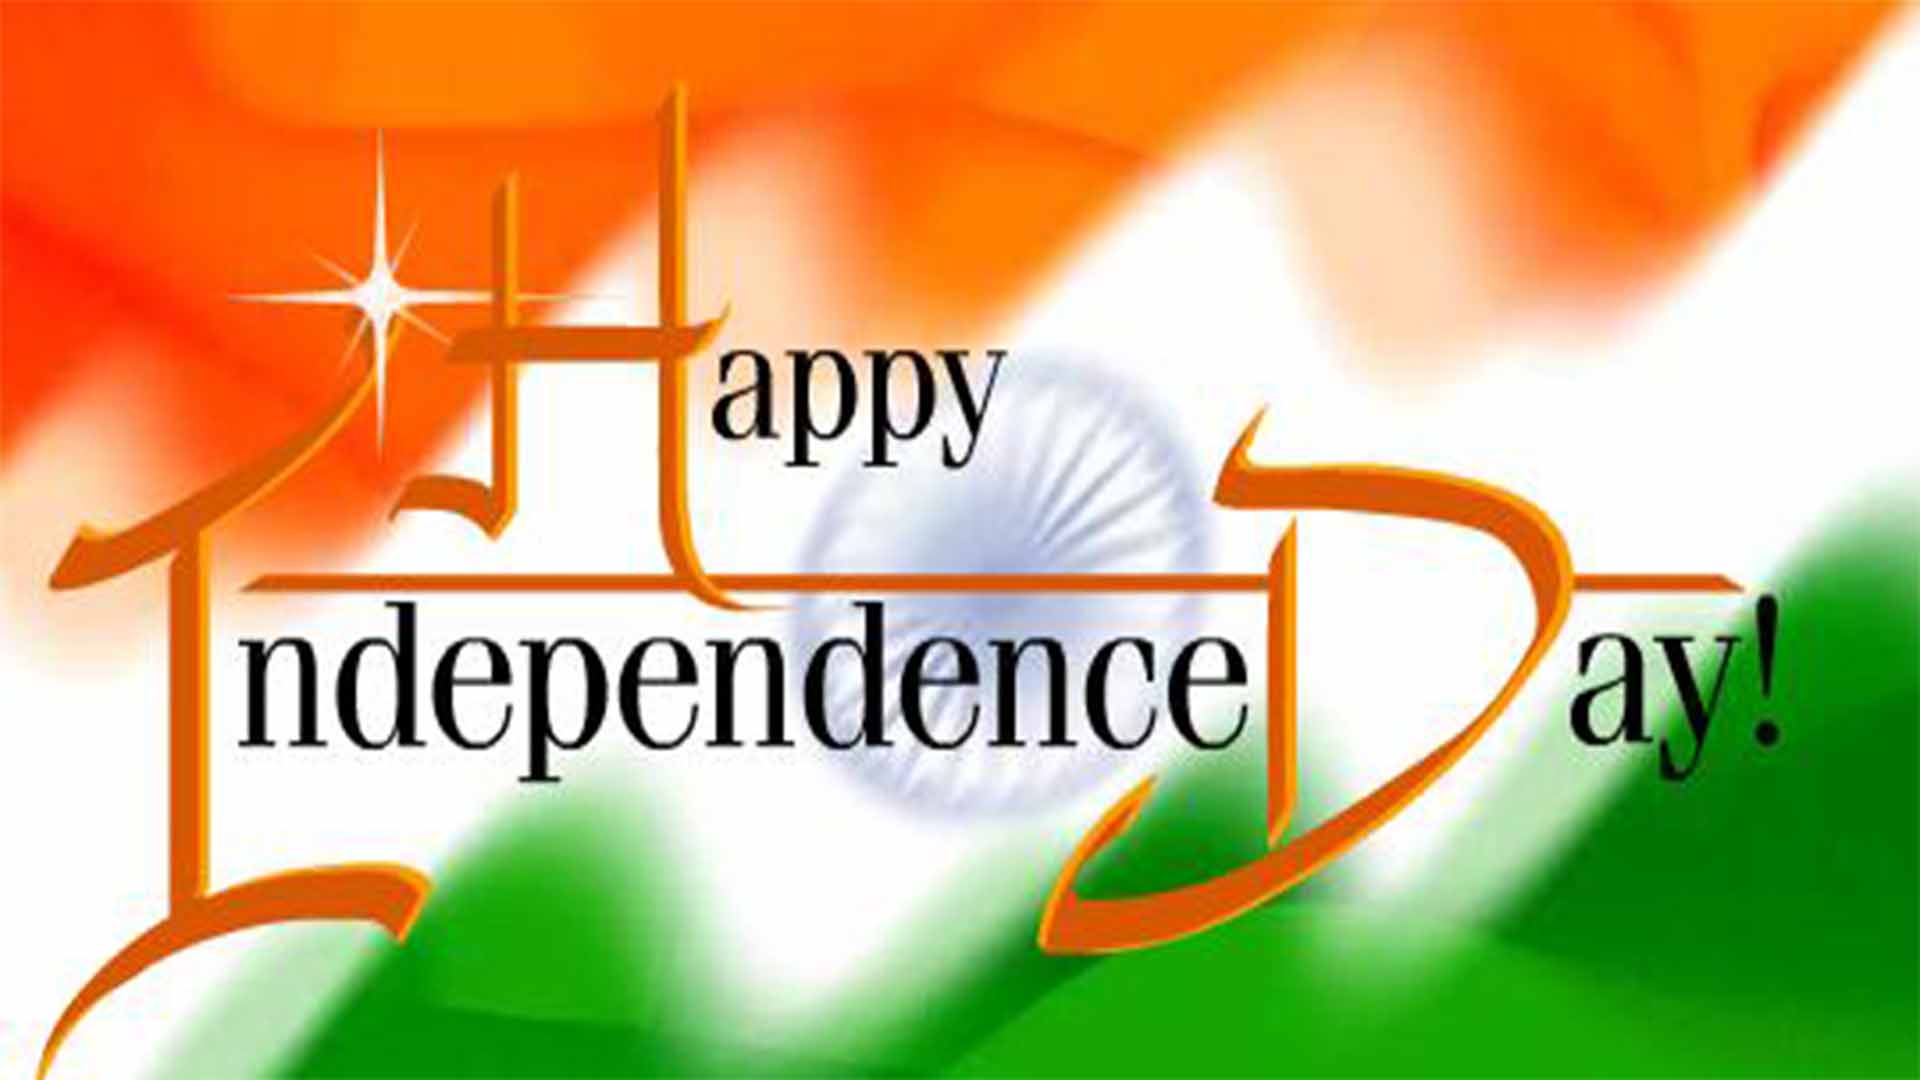 india independence day 2018 image